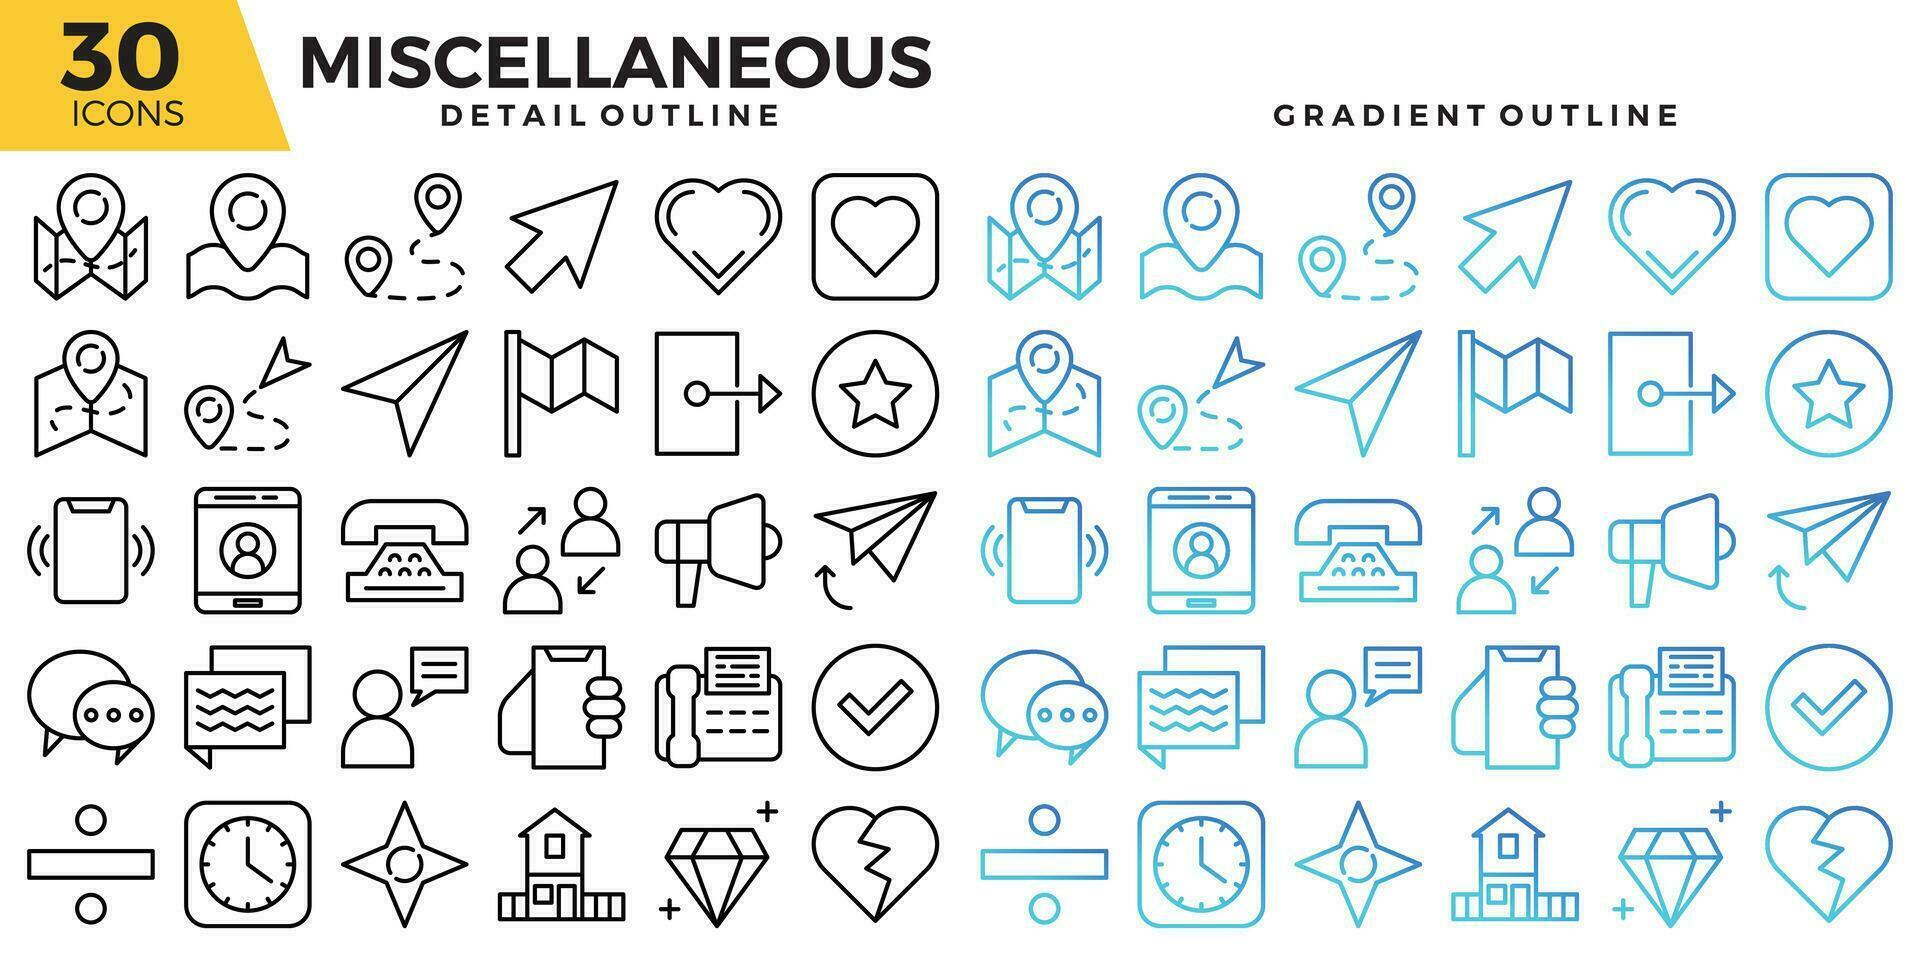 Miscellaneous outline icons set. The collections include for web design,app design, software design, presentations,marketing or communications,ui design and other vector